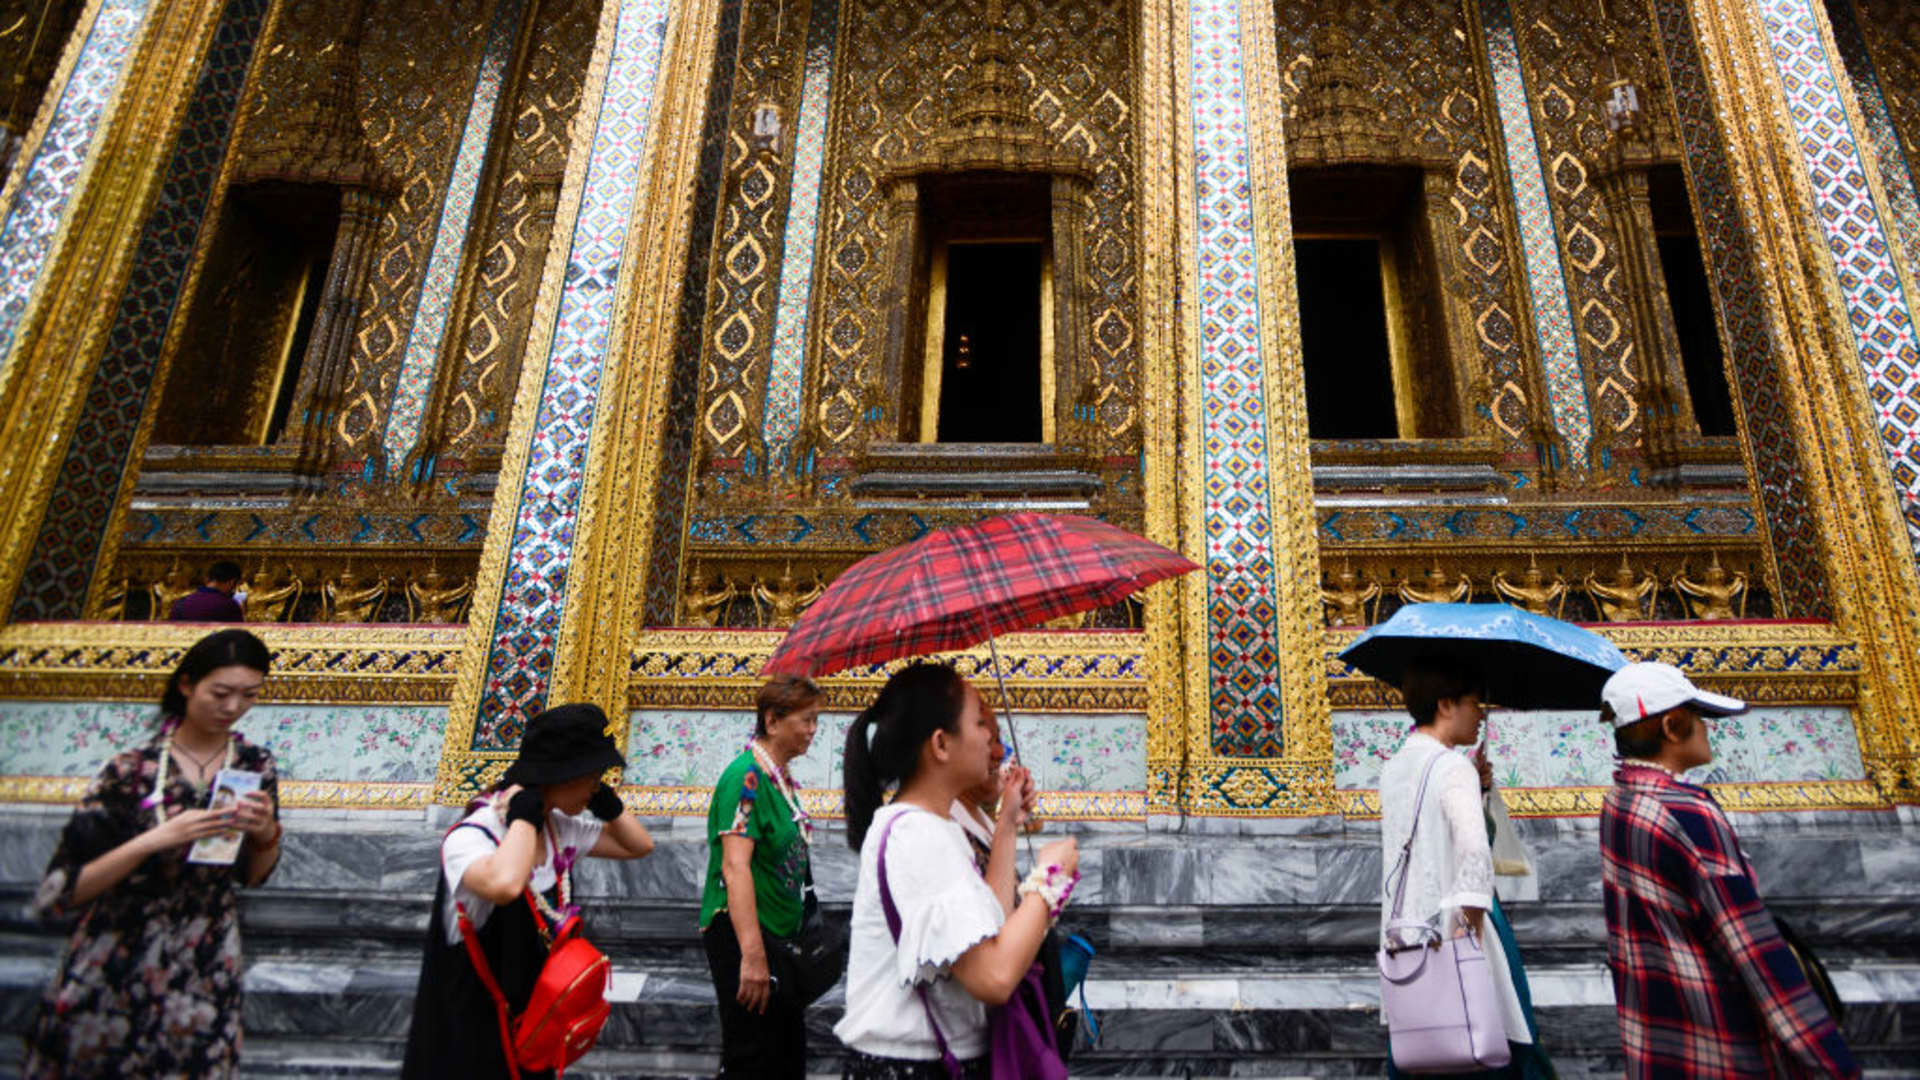 Fear is driving Chinese travelers away from two of Asia’s most popular destinations